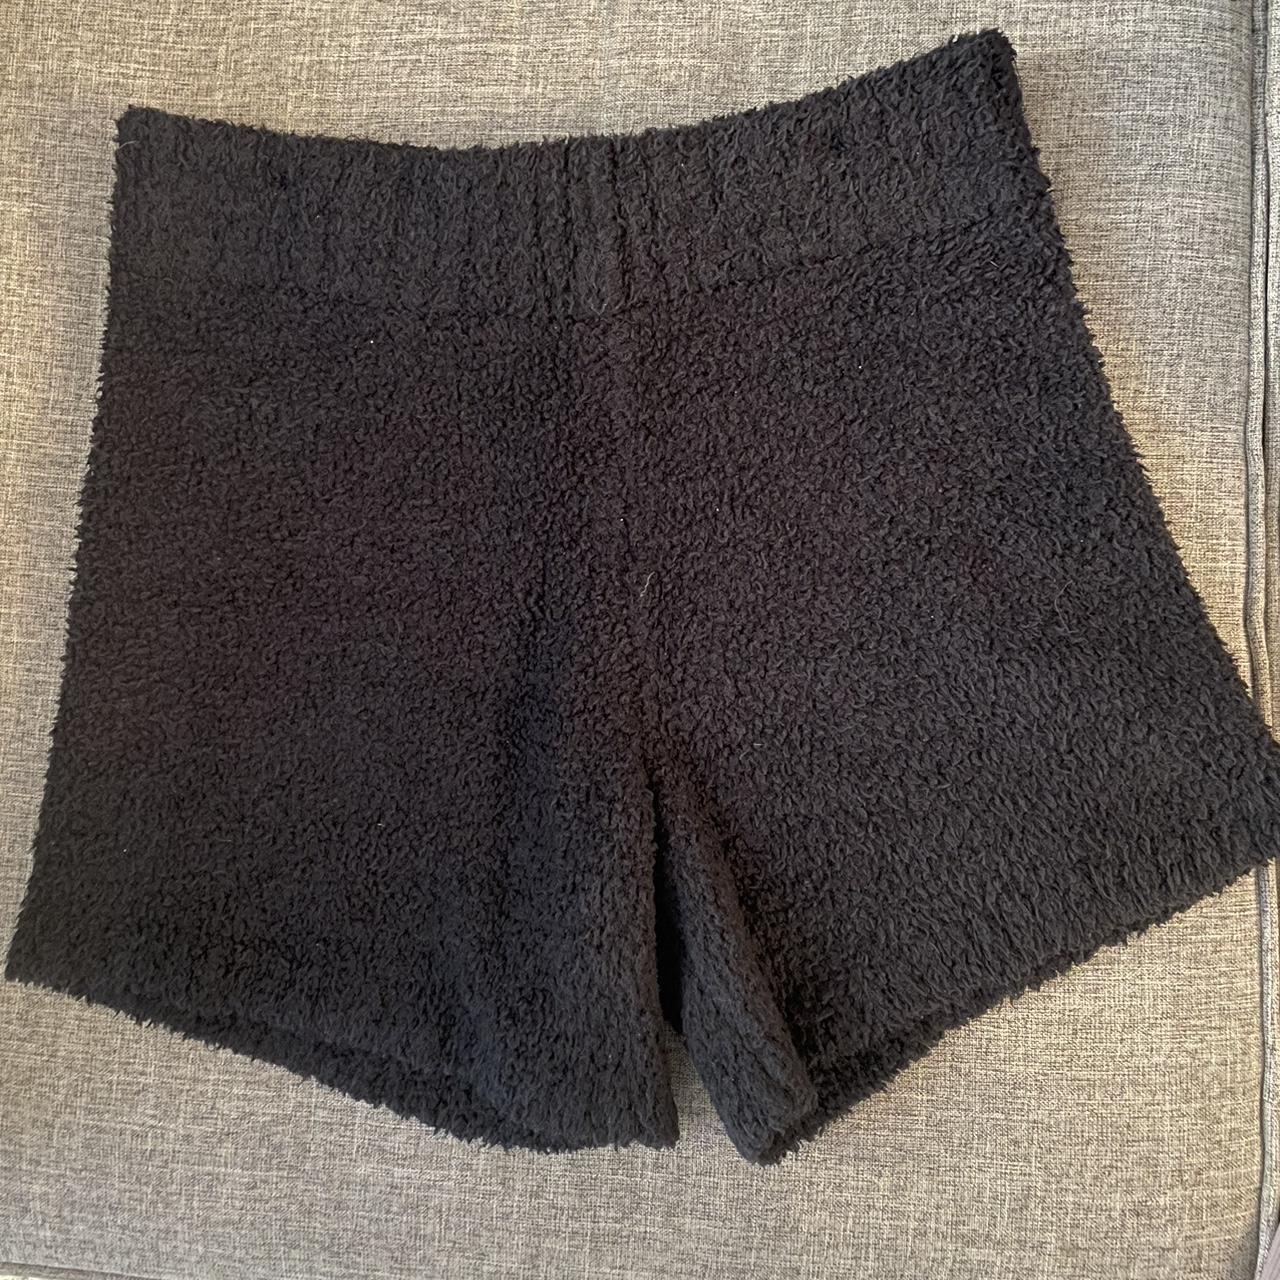 Skims Cozy Knit Shorts🤎 ✨Size Small ✨Blush brown - Depop